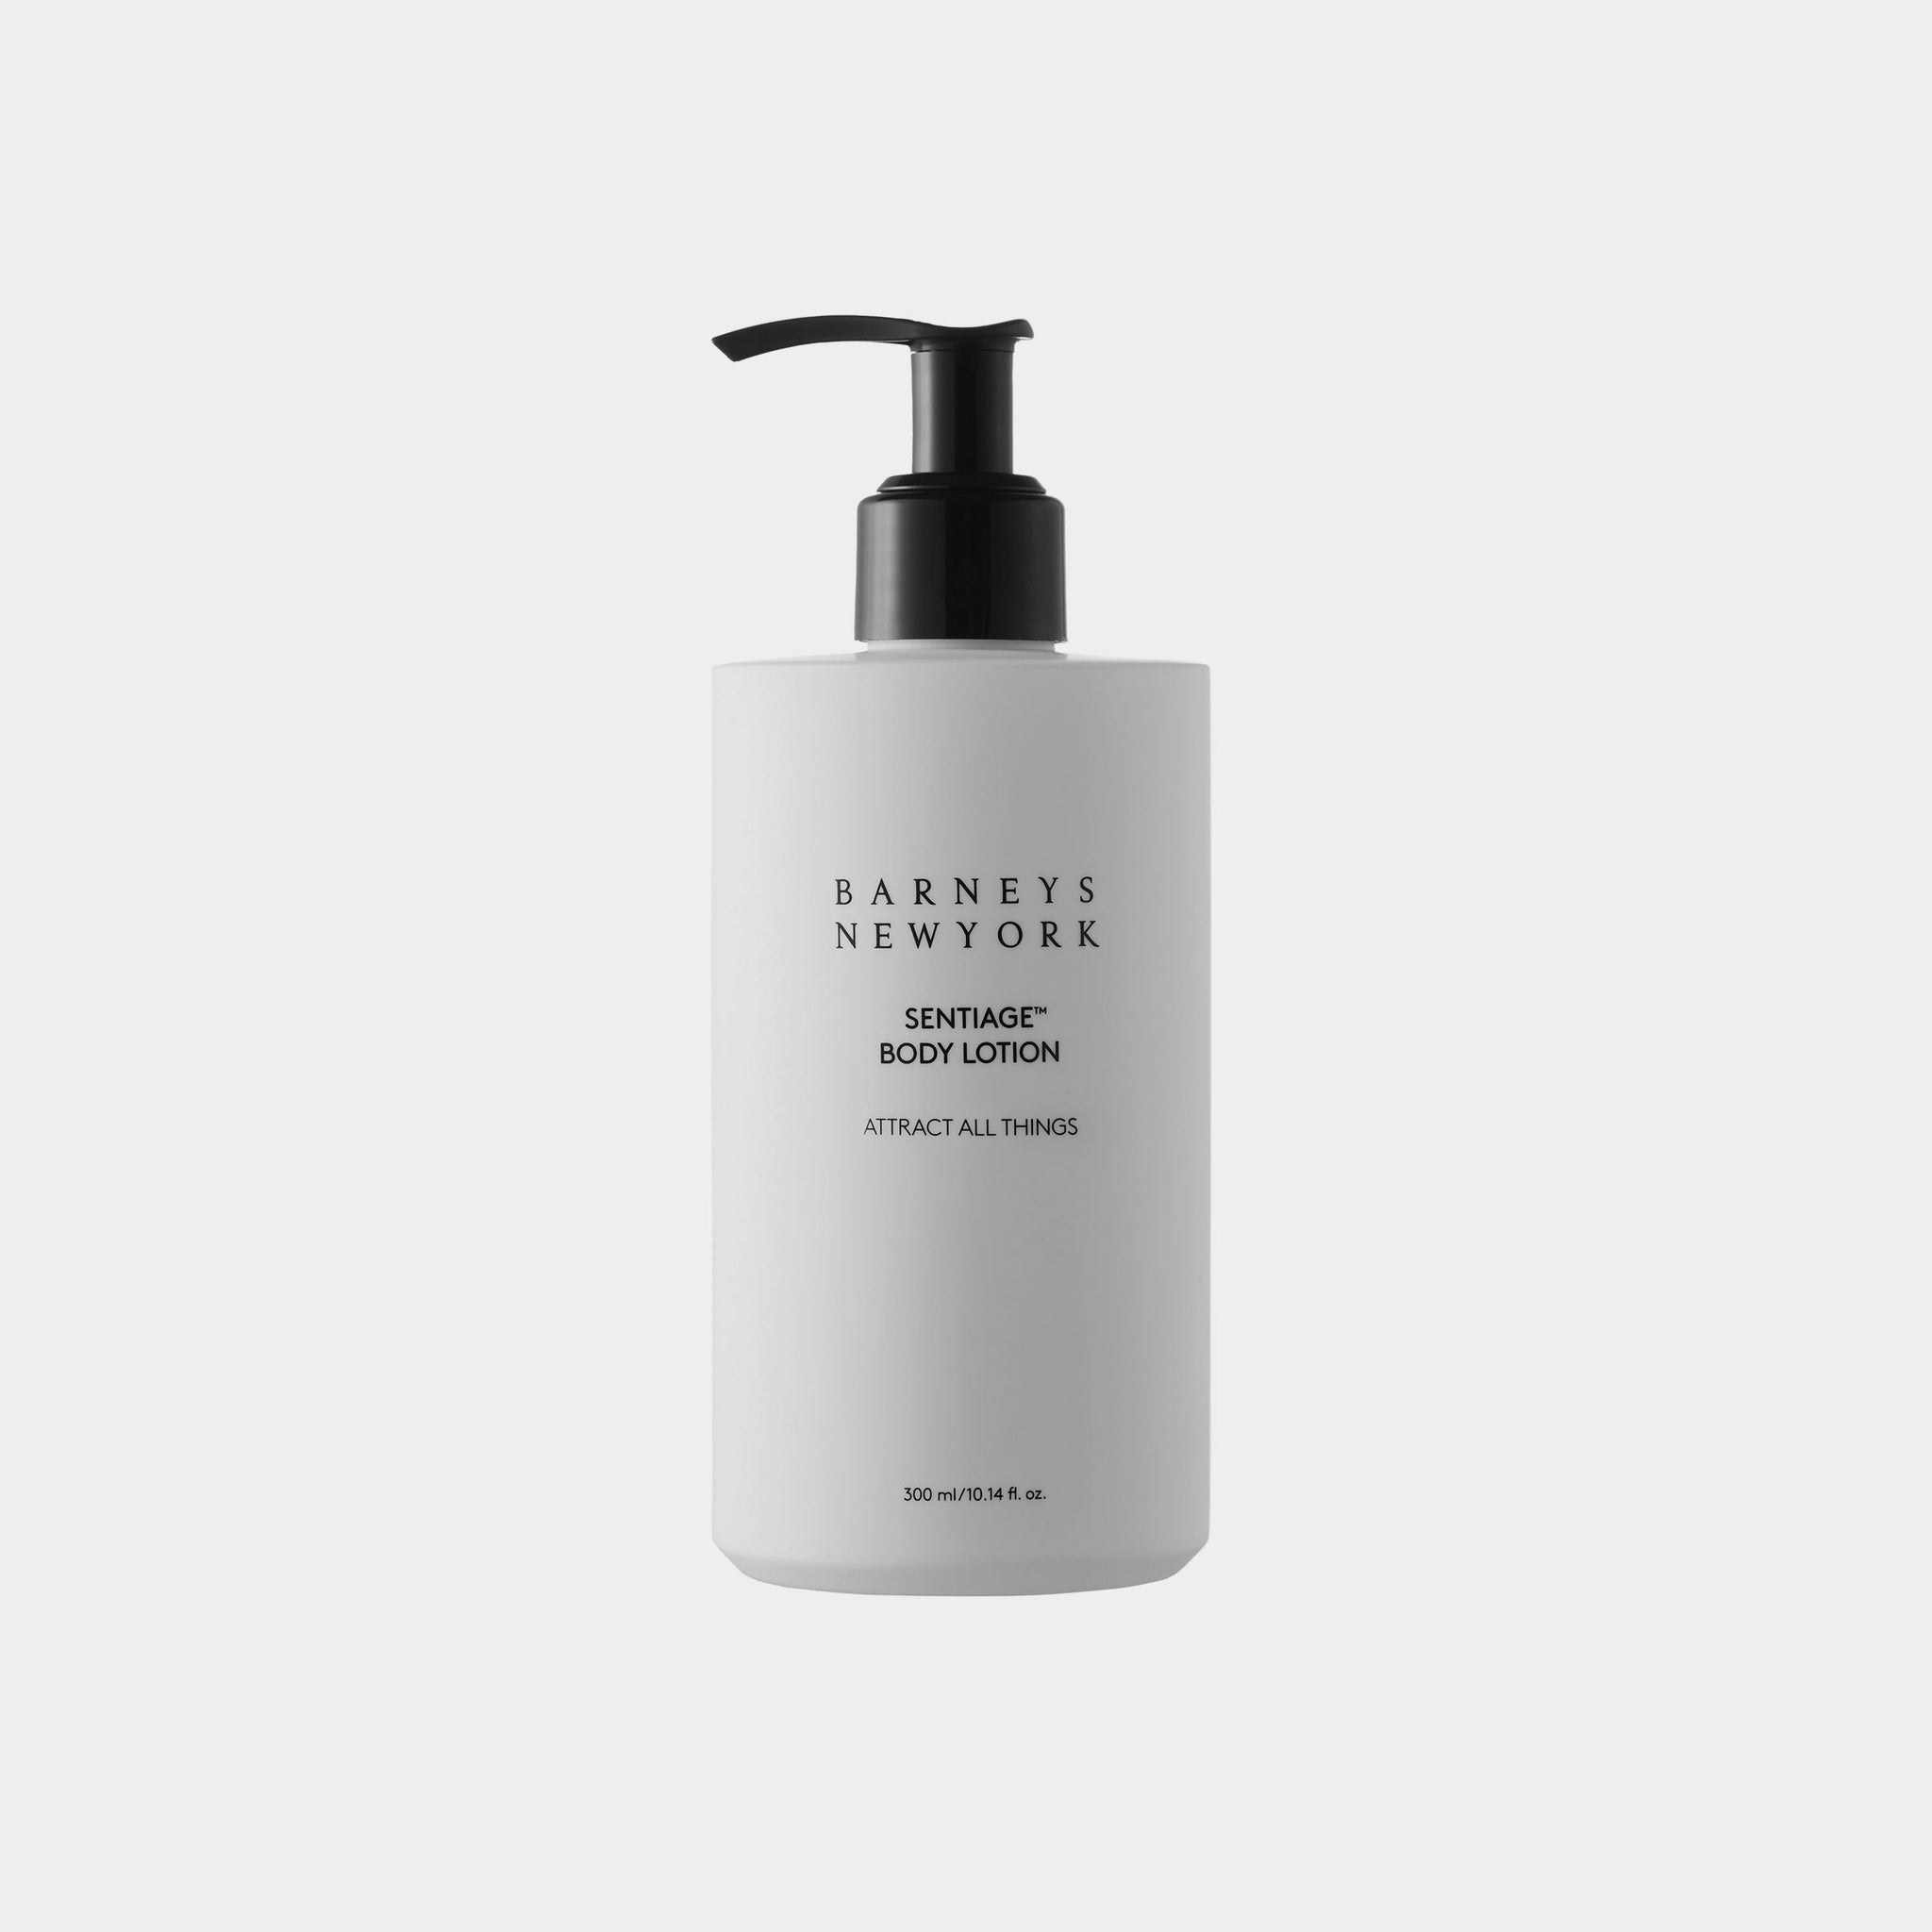 Sentiage™ Body Lotion Attract All Things 300ml